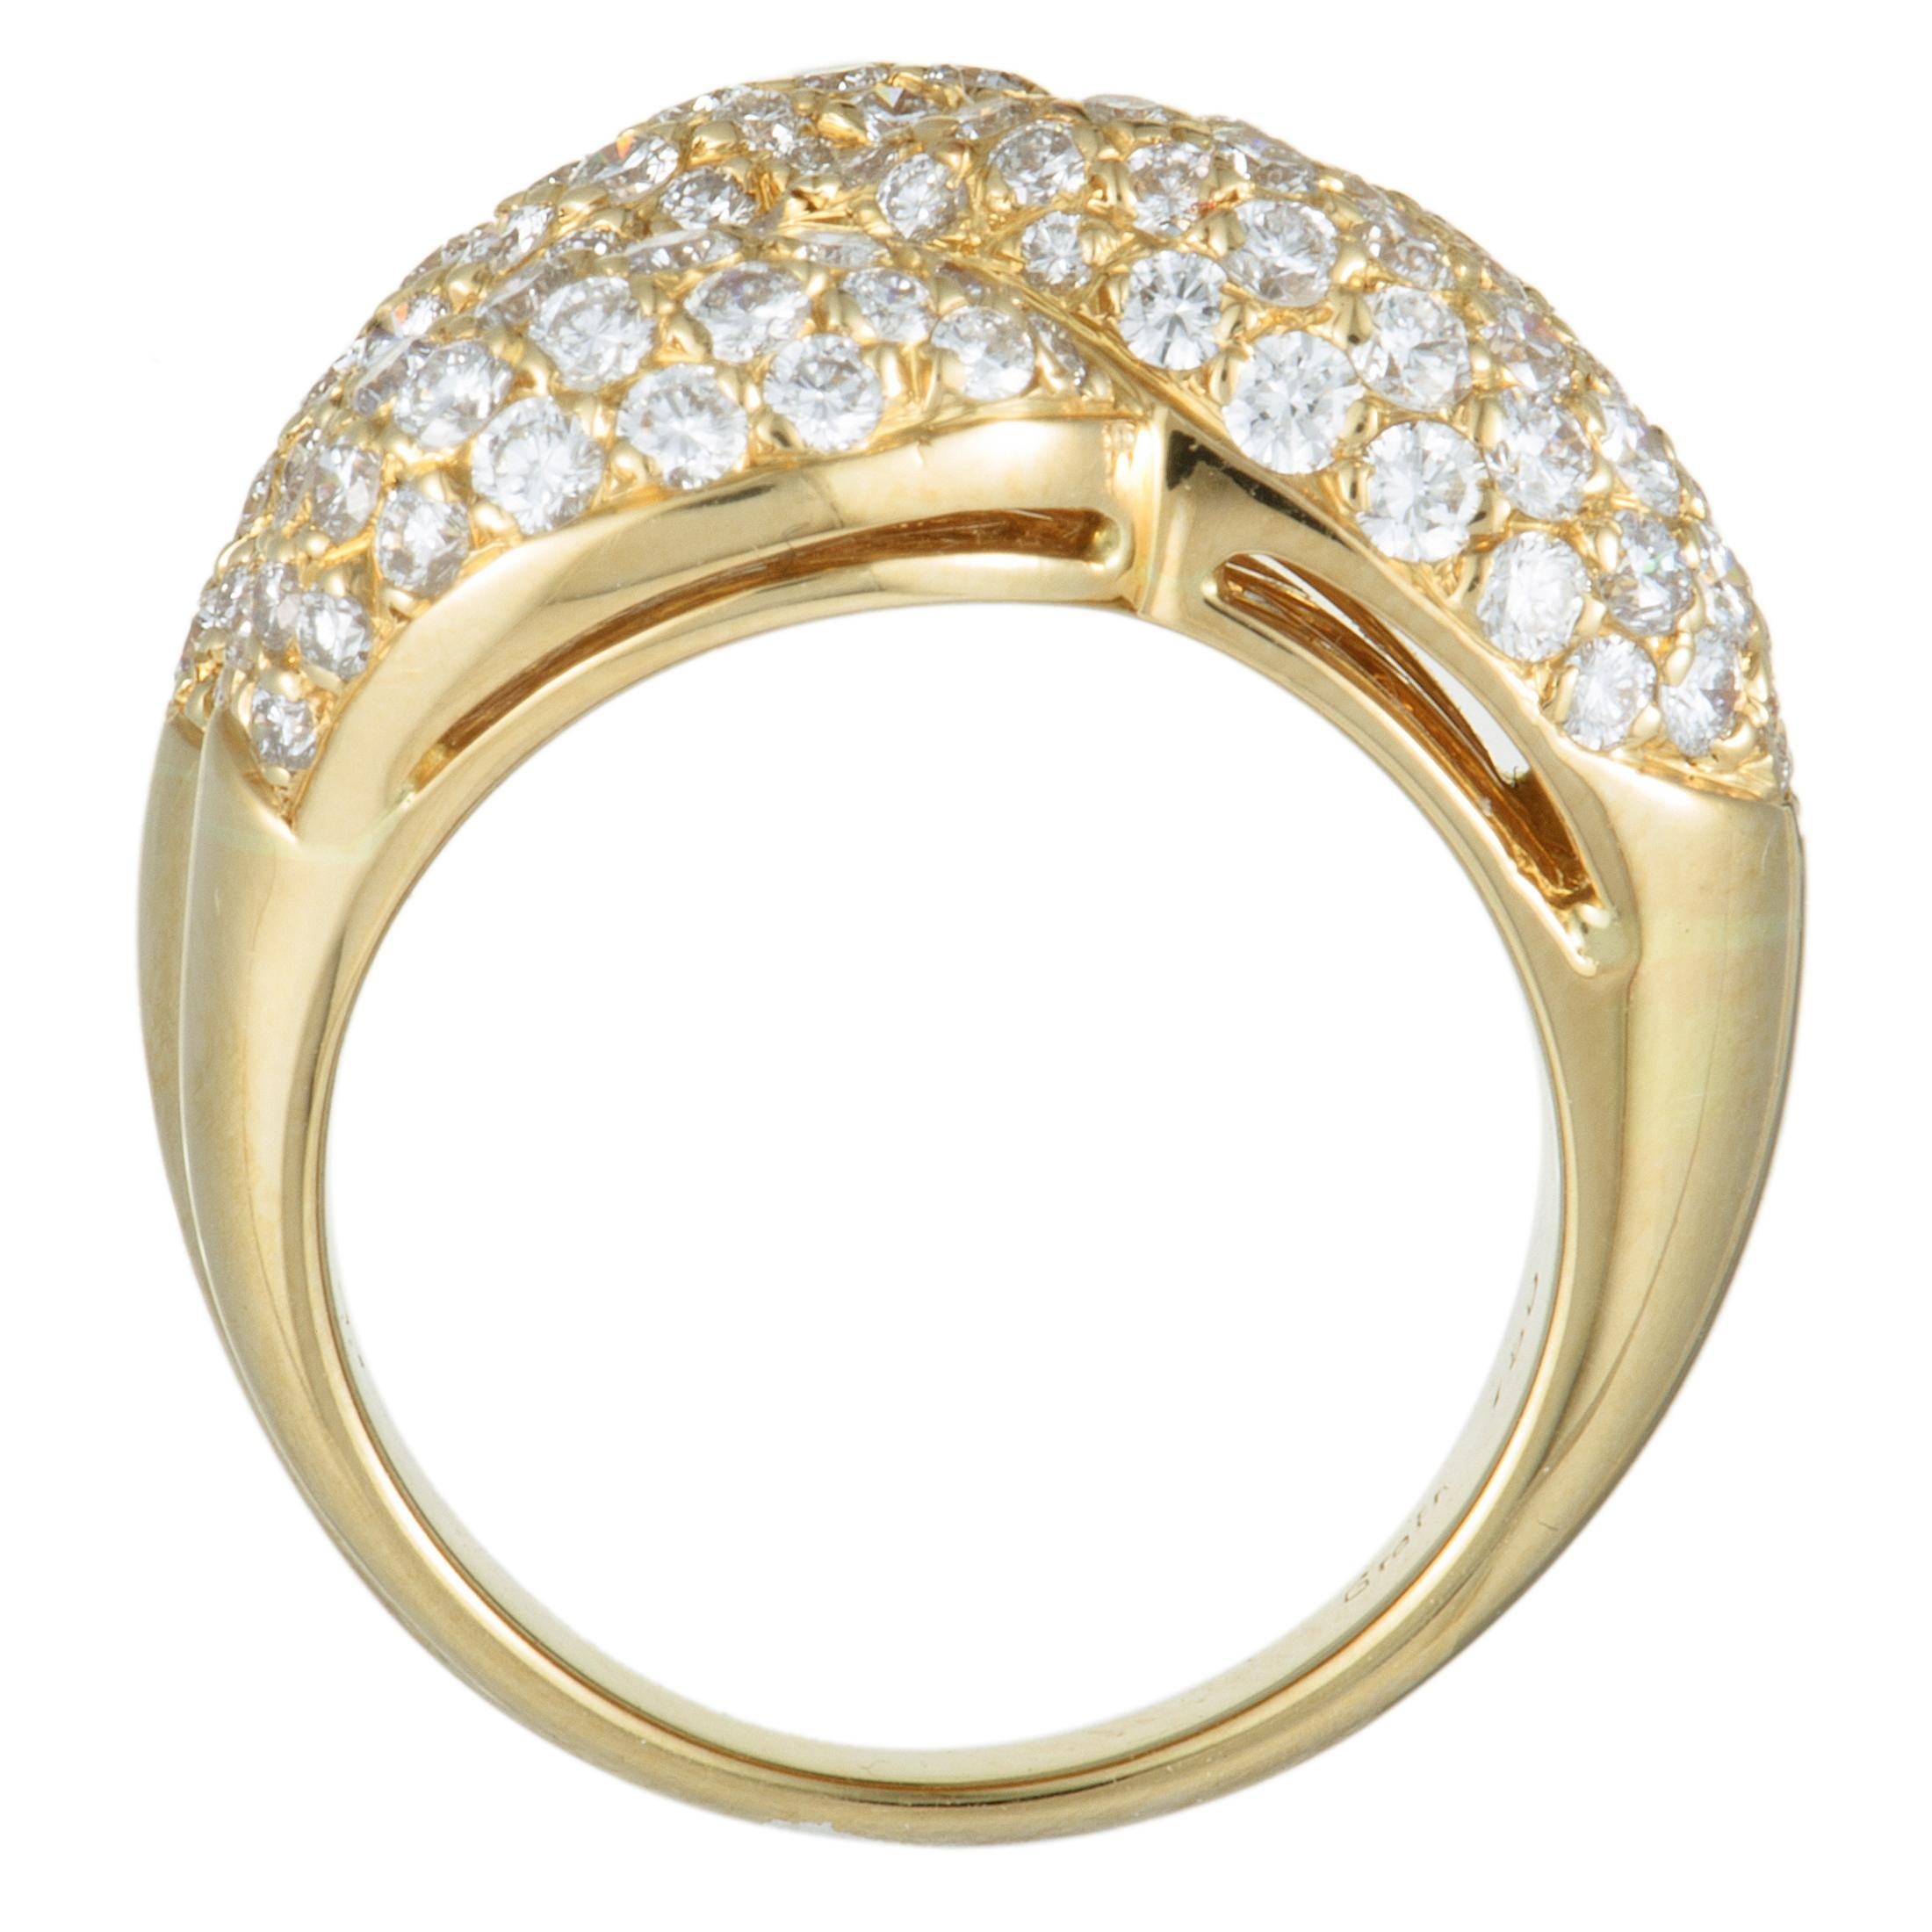 If you are looking for a jewelry piece that will be both extravagantly alluring and elegantly refined then this majestic ring from Graff is a perfect choice. Masterfully crafted from luxurious 18K yellow gold, the ring is expertly set with colorless